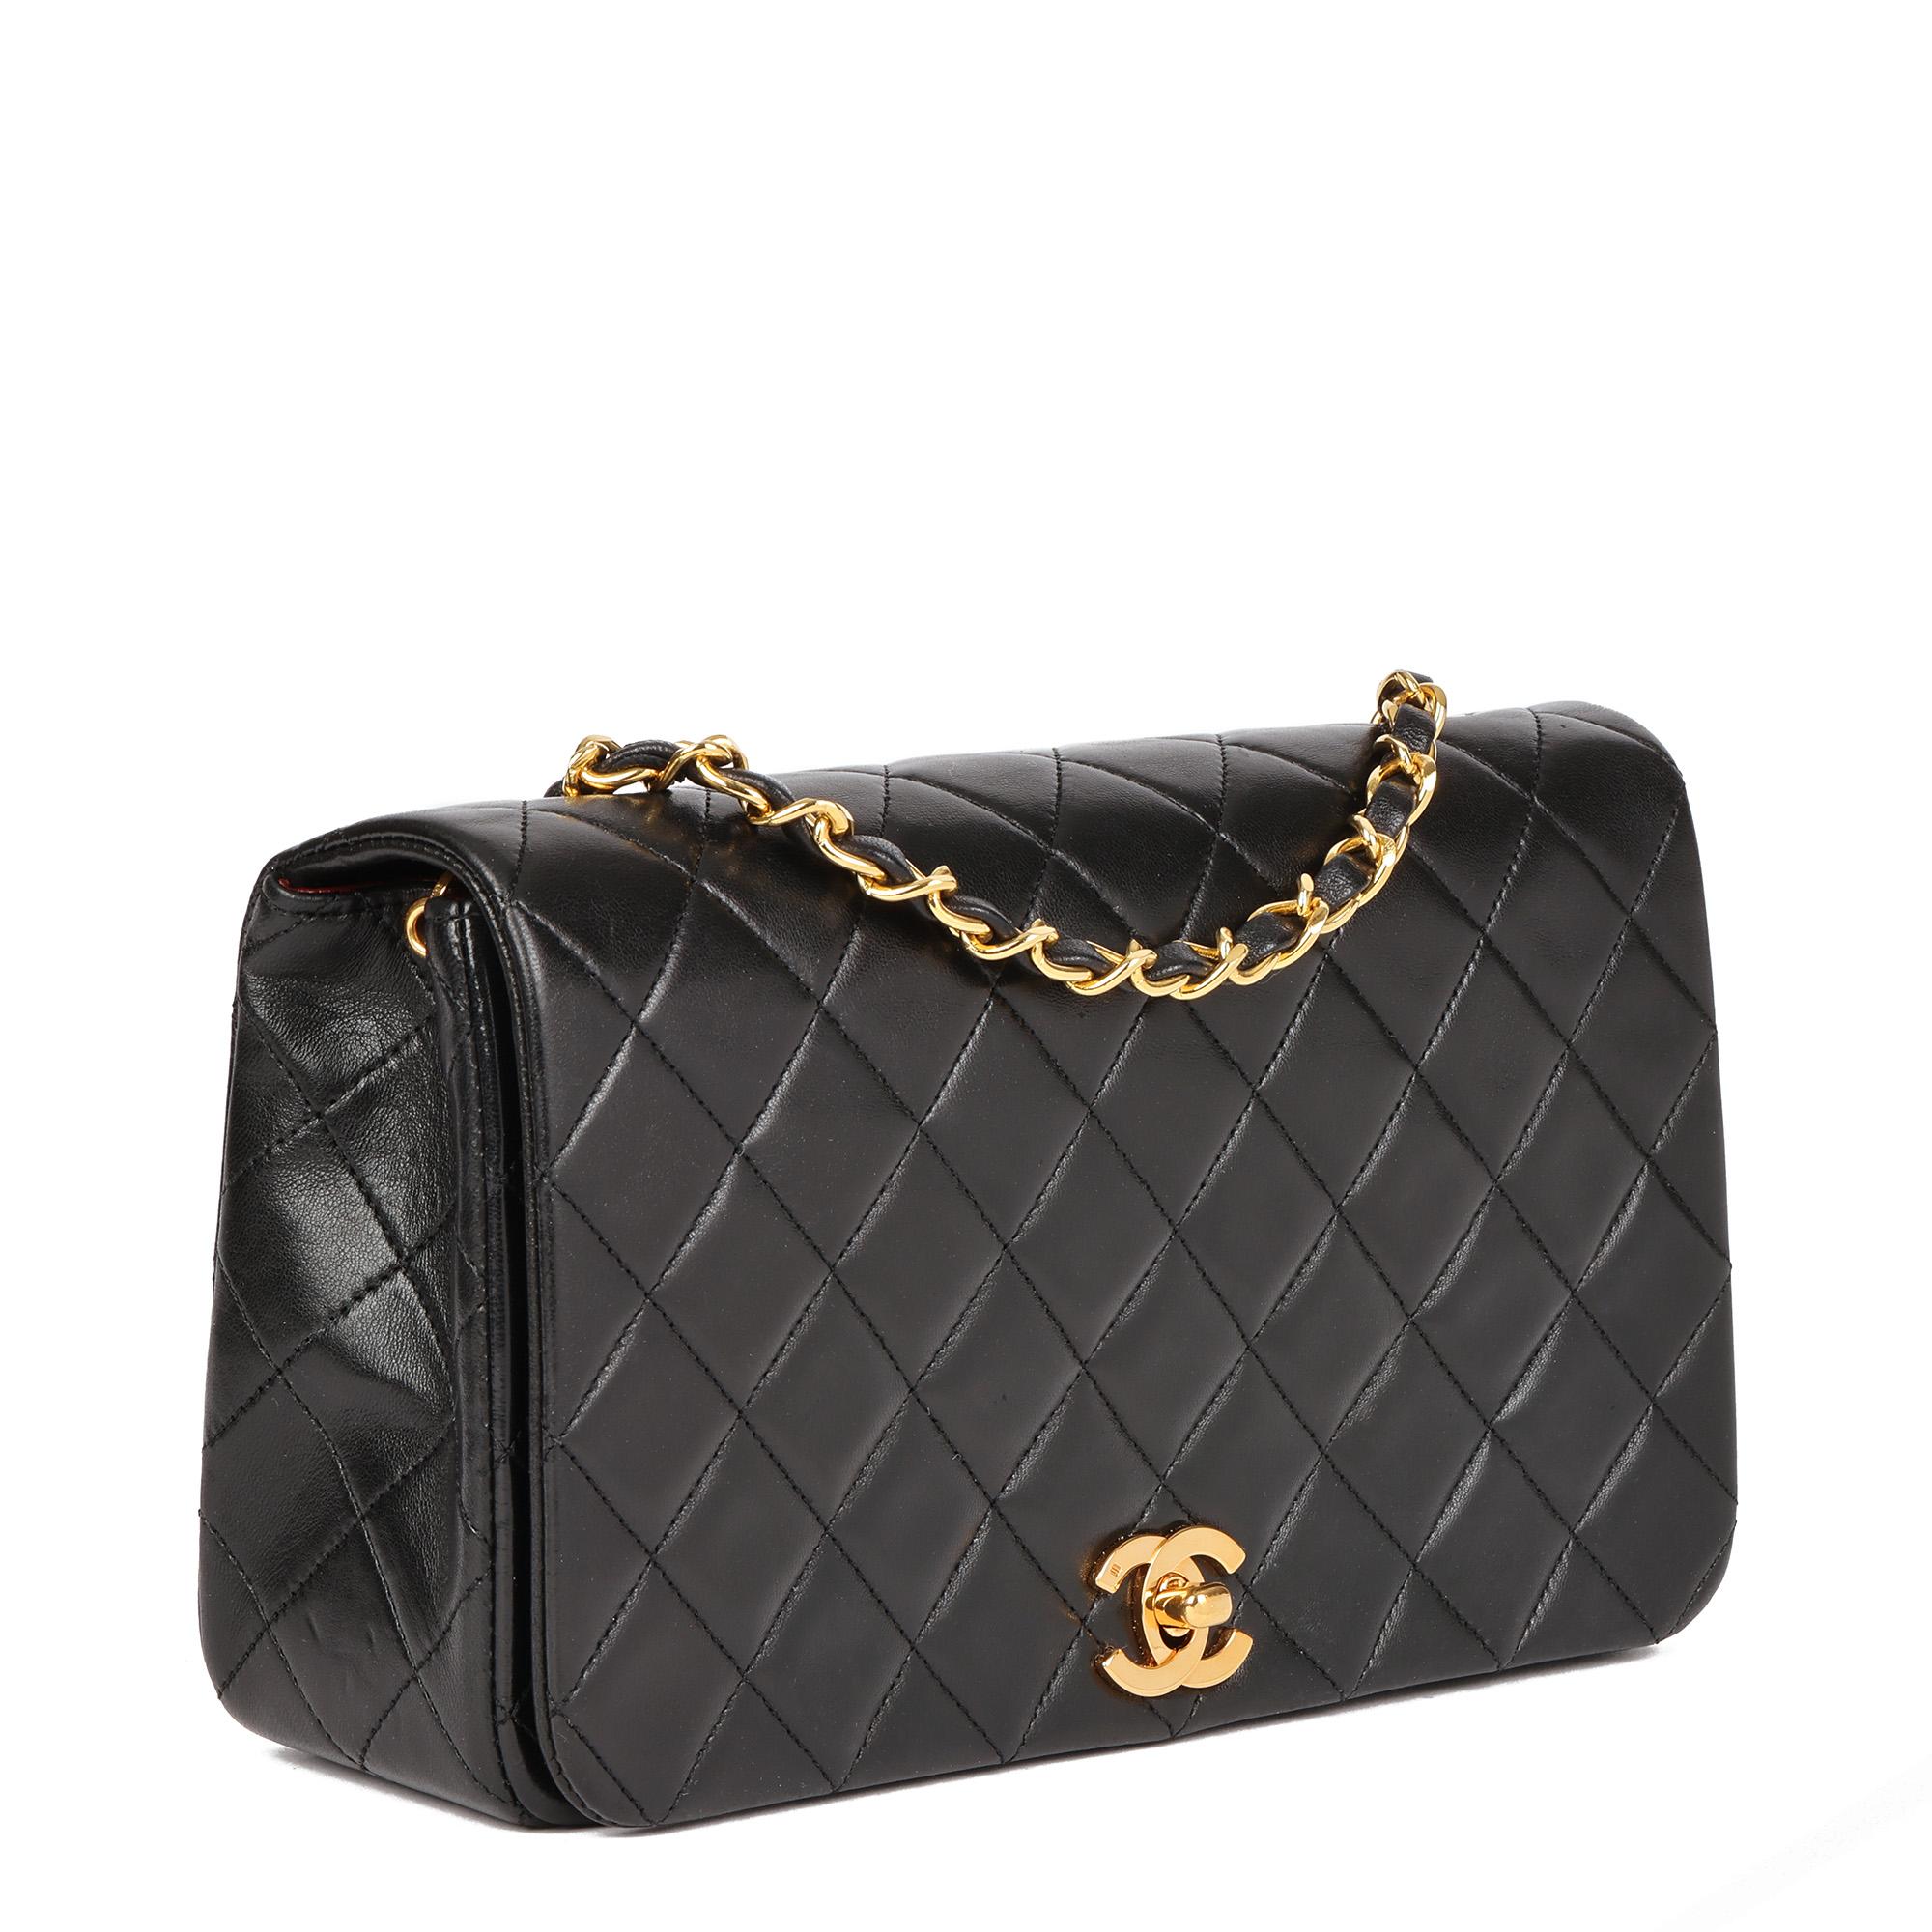 CHANEL
Black Quilted Lambskin Vintage Small Classic Single Full Flap Bag

Xupes Reference: HB4587
Serial Number: 1221227
Age (Circa): 1990
Accompanied By: Chanel Dust Bag, Authenticity Card
Authenticity Details: Authenticity Card, Serial Sticker